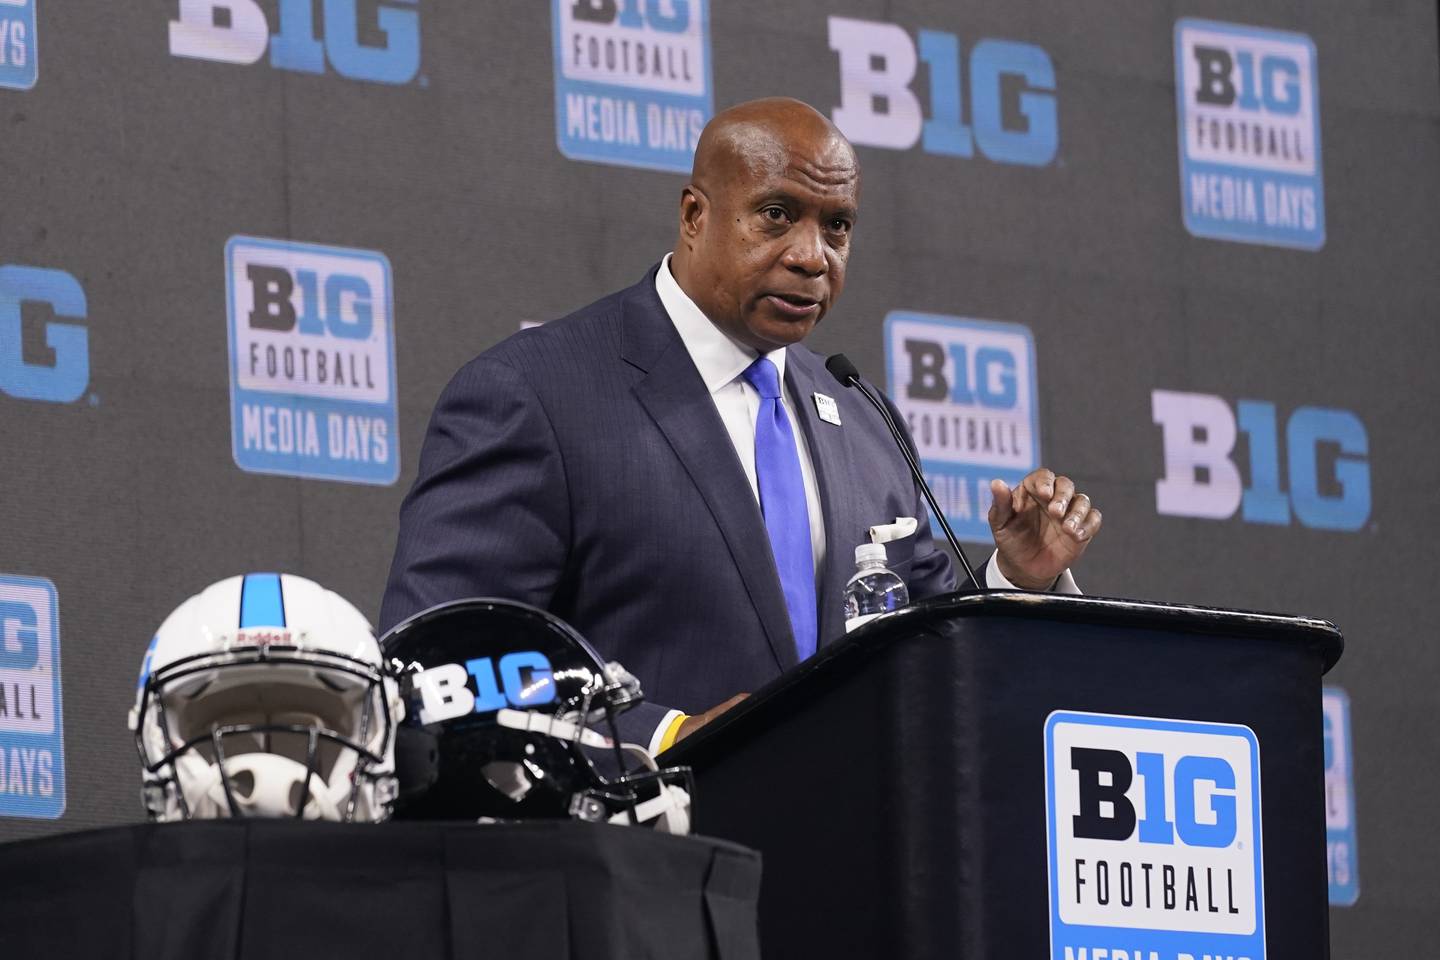 Big Ten Commissioner Kevin Warren talks to reporters during the Big Ten Conference media days for the 2022 football season, at Lucas Oil Stadium, Tuesday, July 26, 2022, in Indianapolis.